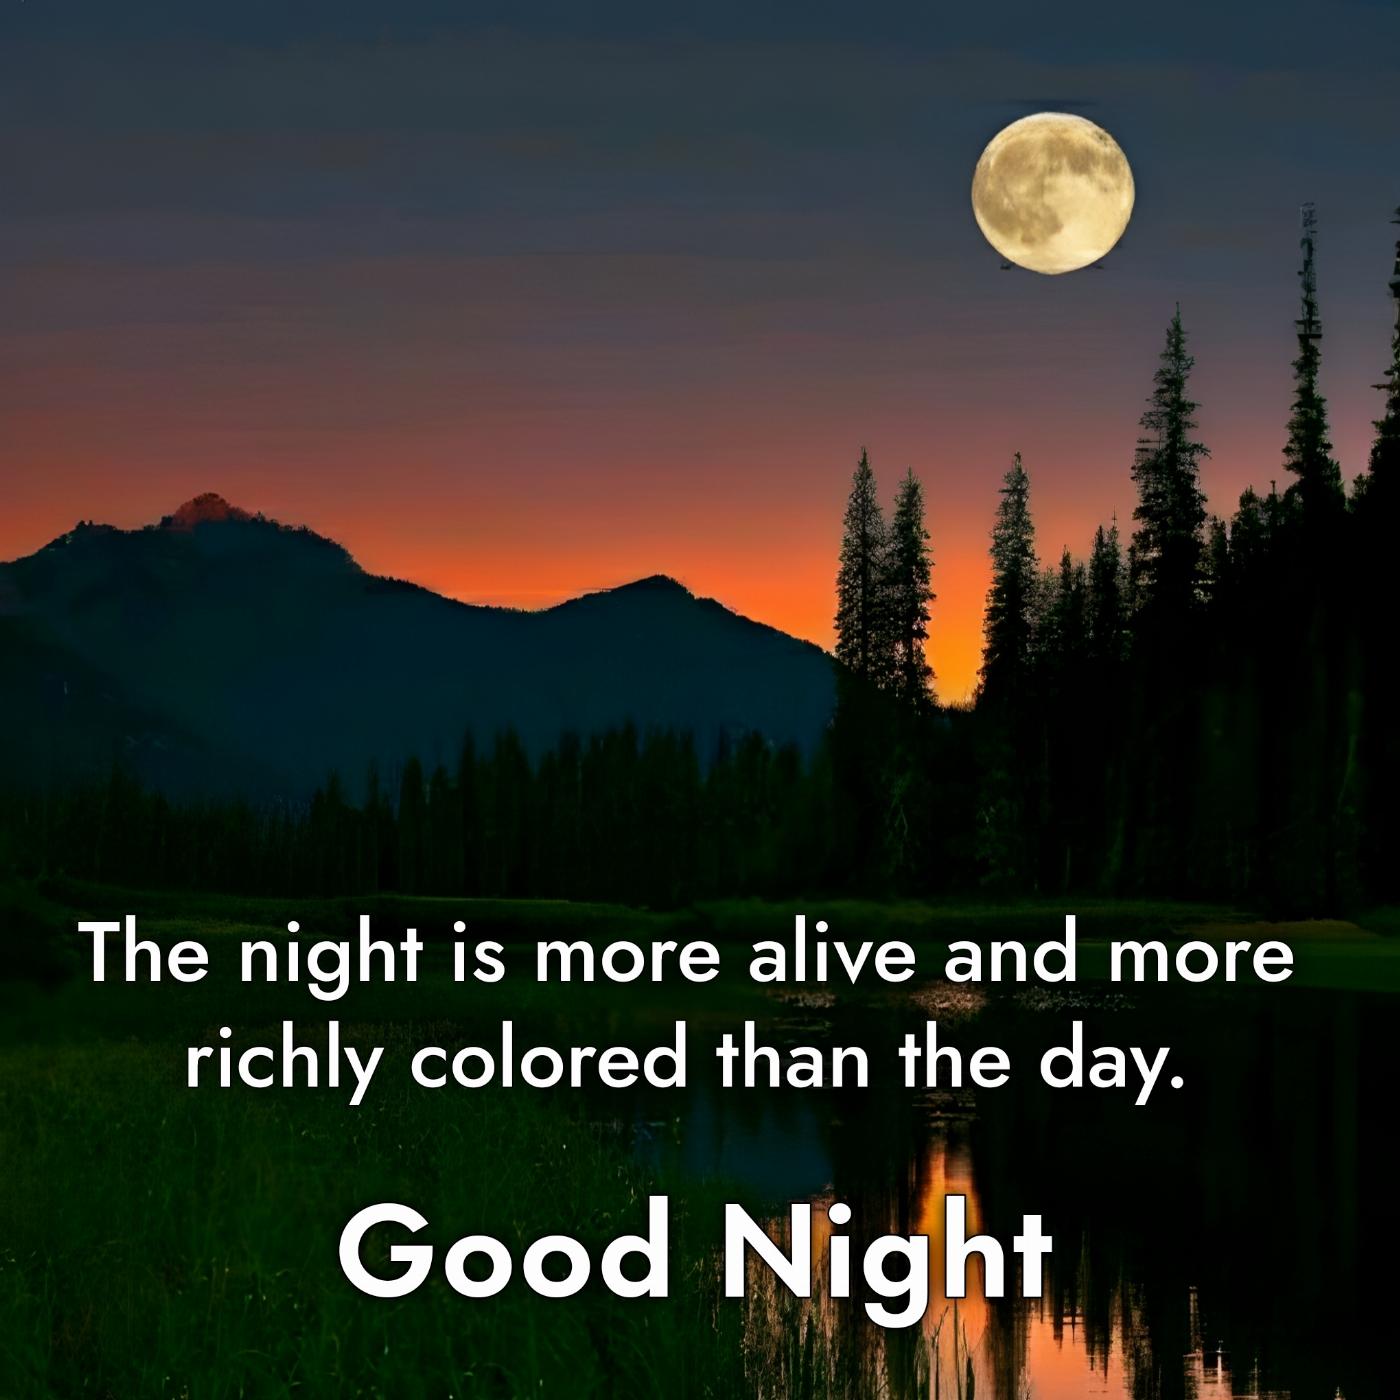 The night is more alive and more richly colored